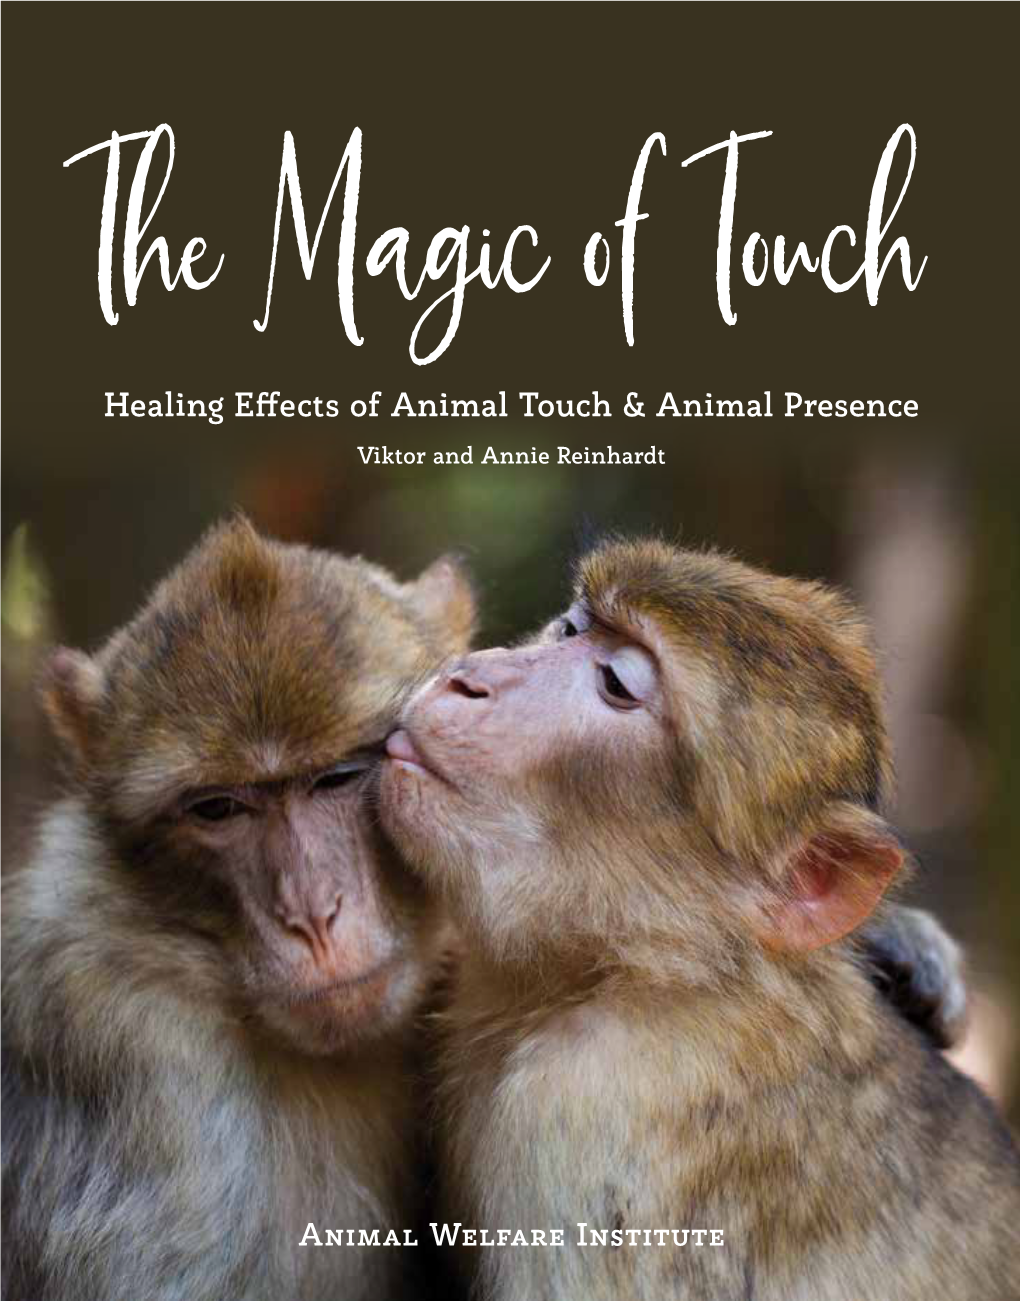 Healing Effects of Animal Touch & Animal Presence